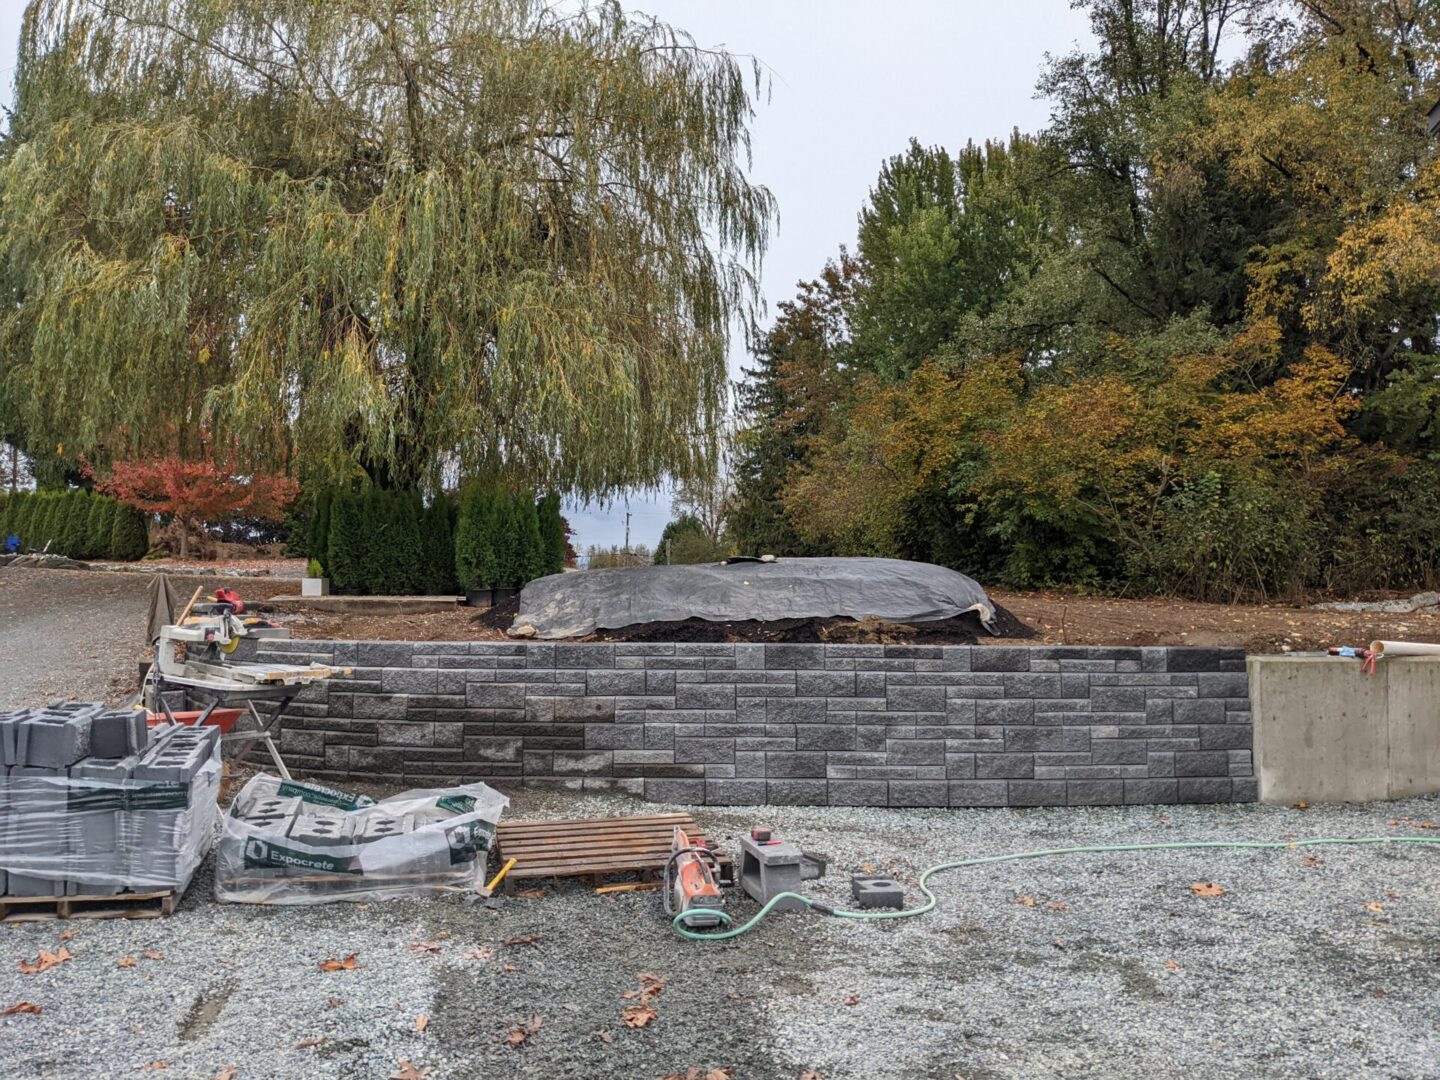 Construction site with stone retaining walls under development, building materials scattered around, and a weeping willow in the background.